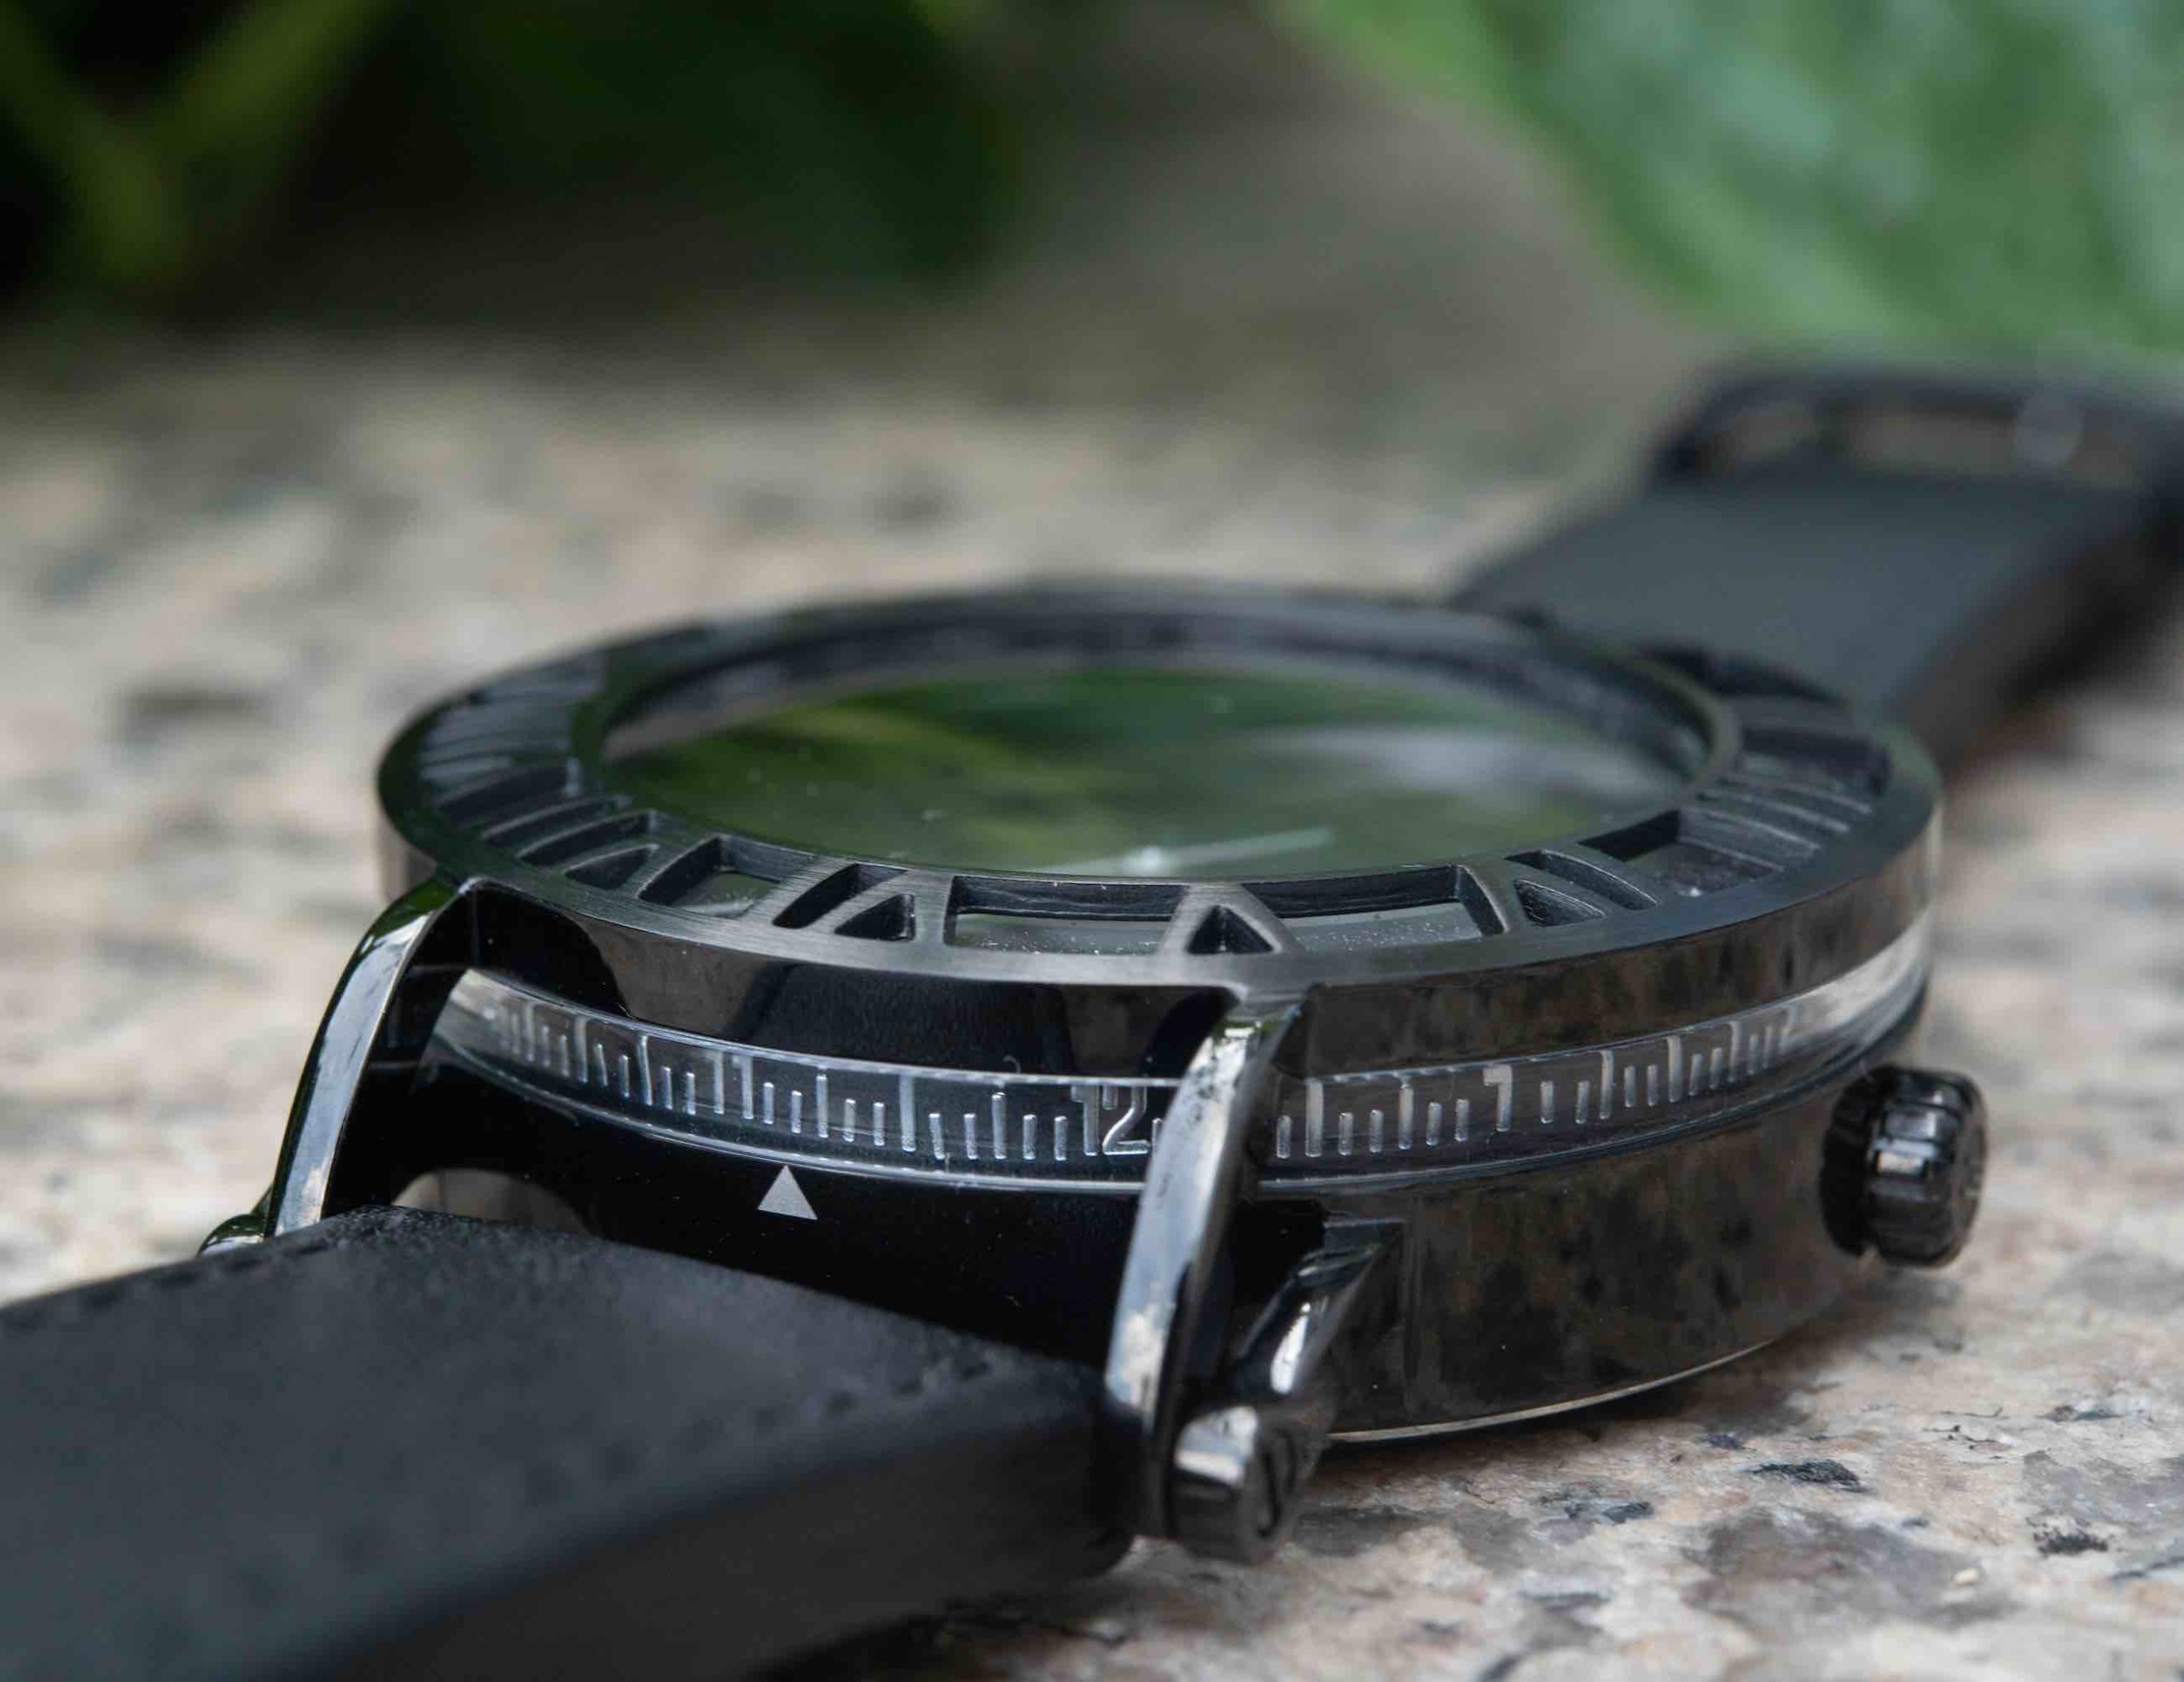 Horizon Timepiece Stealth Automatic Watch discreetly tells you the time